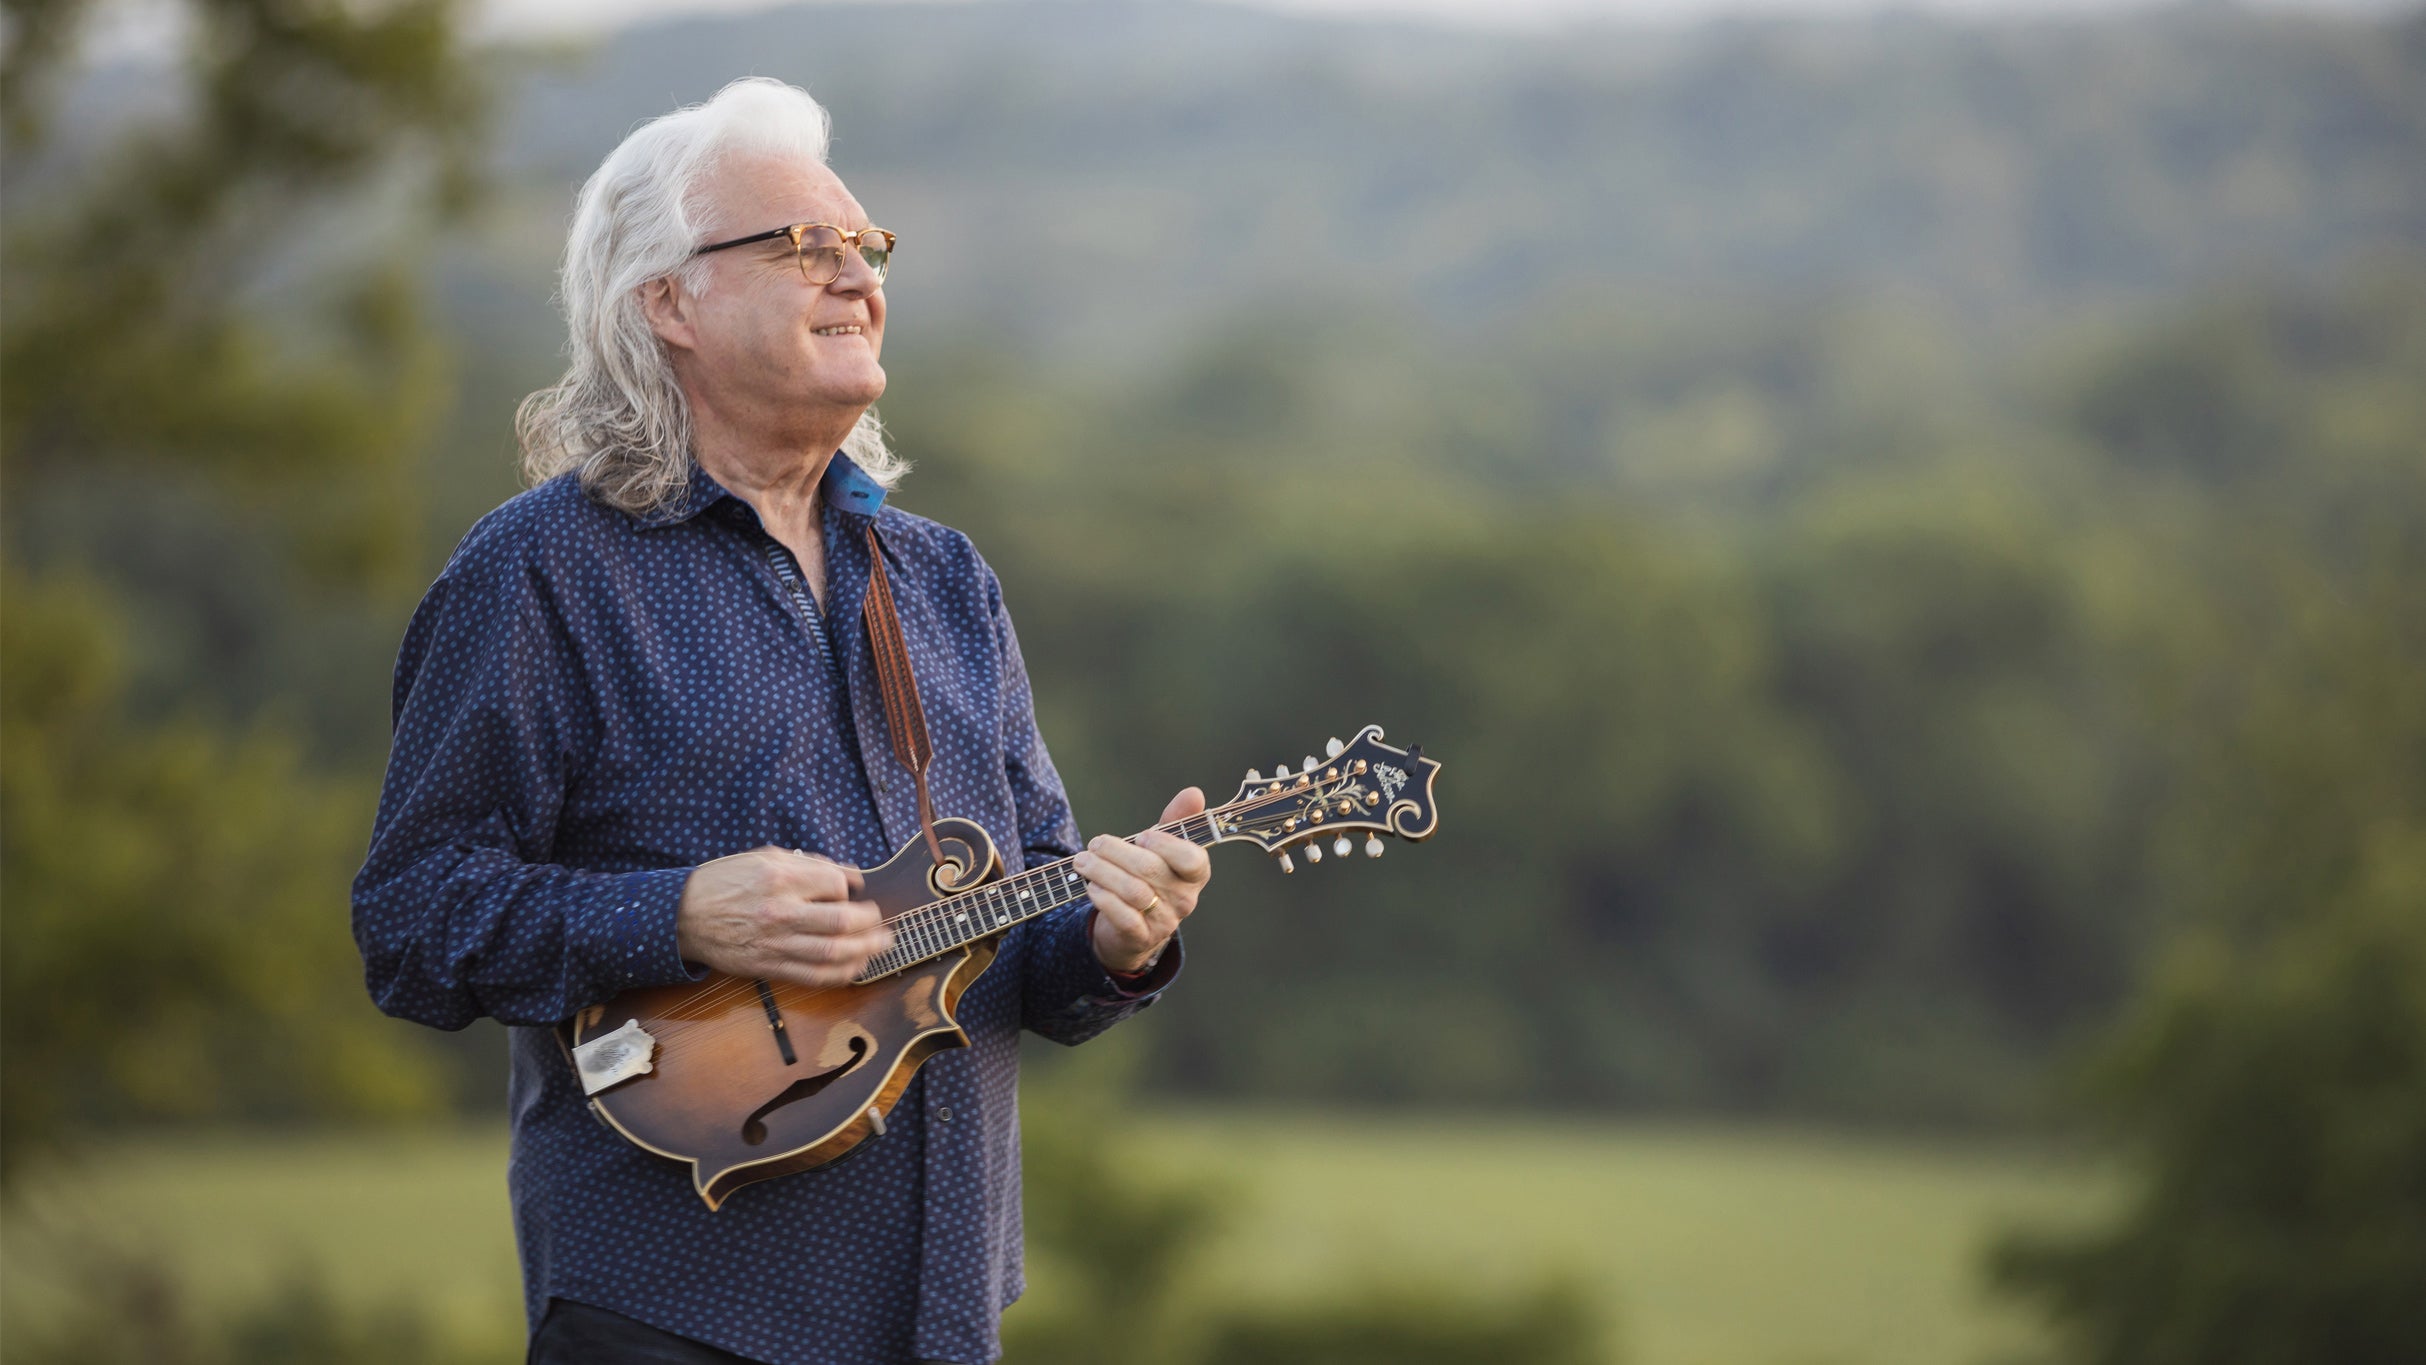 Ricky Skaggs at Blue Gate Performing Arts Center